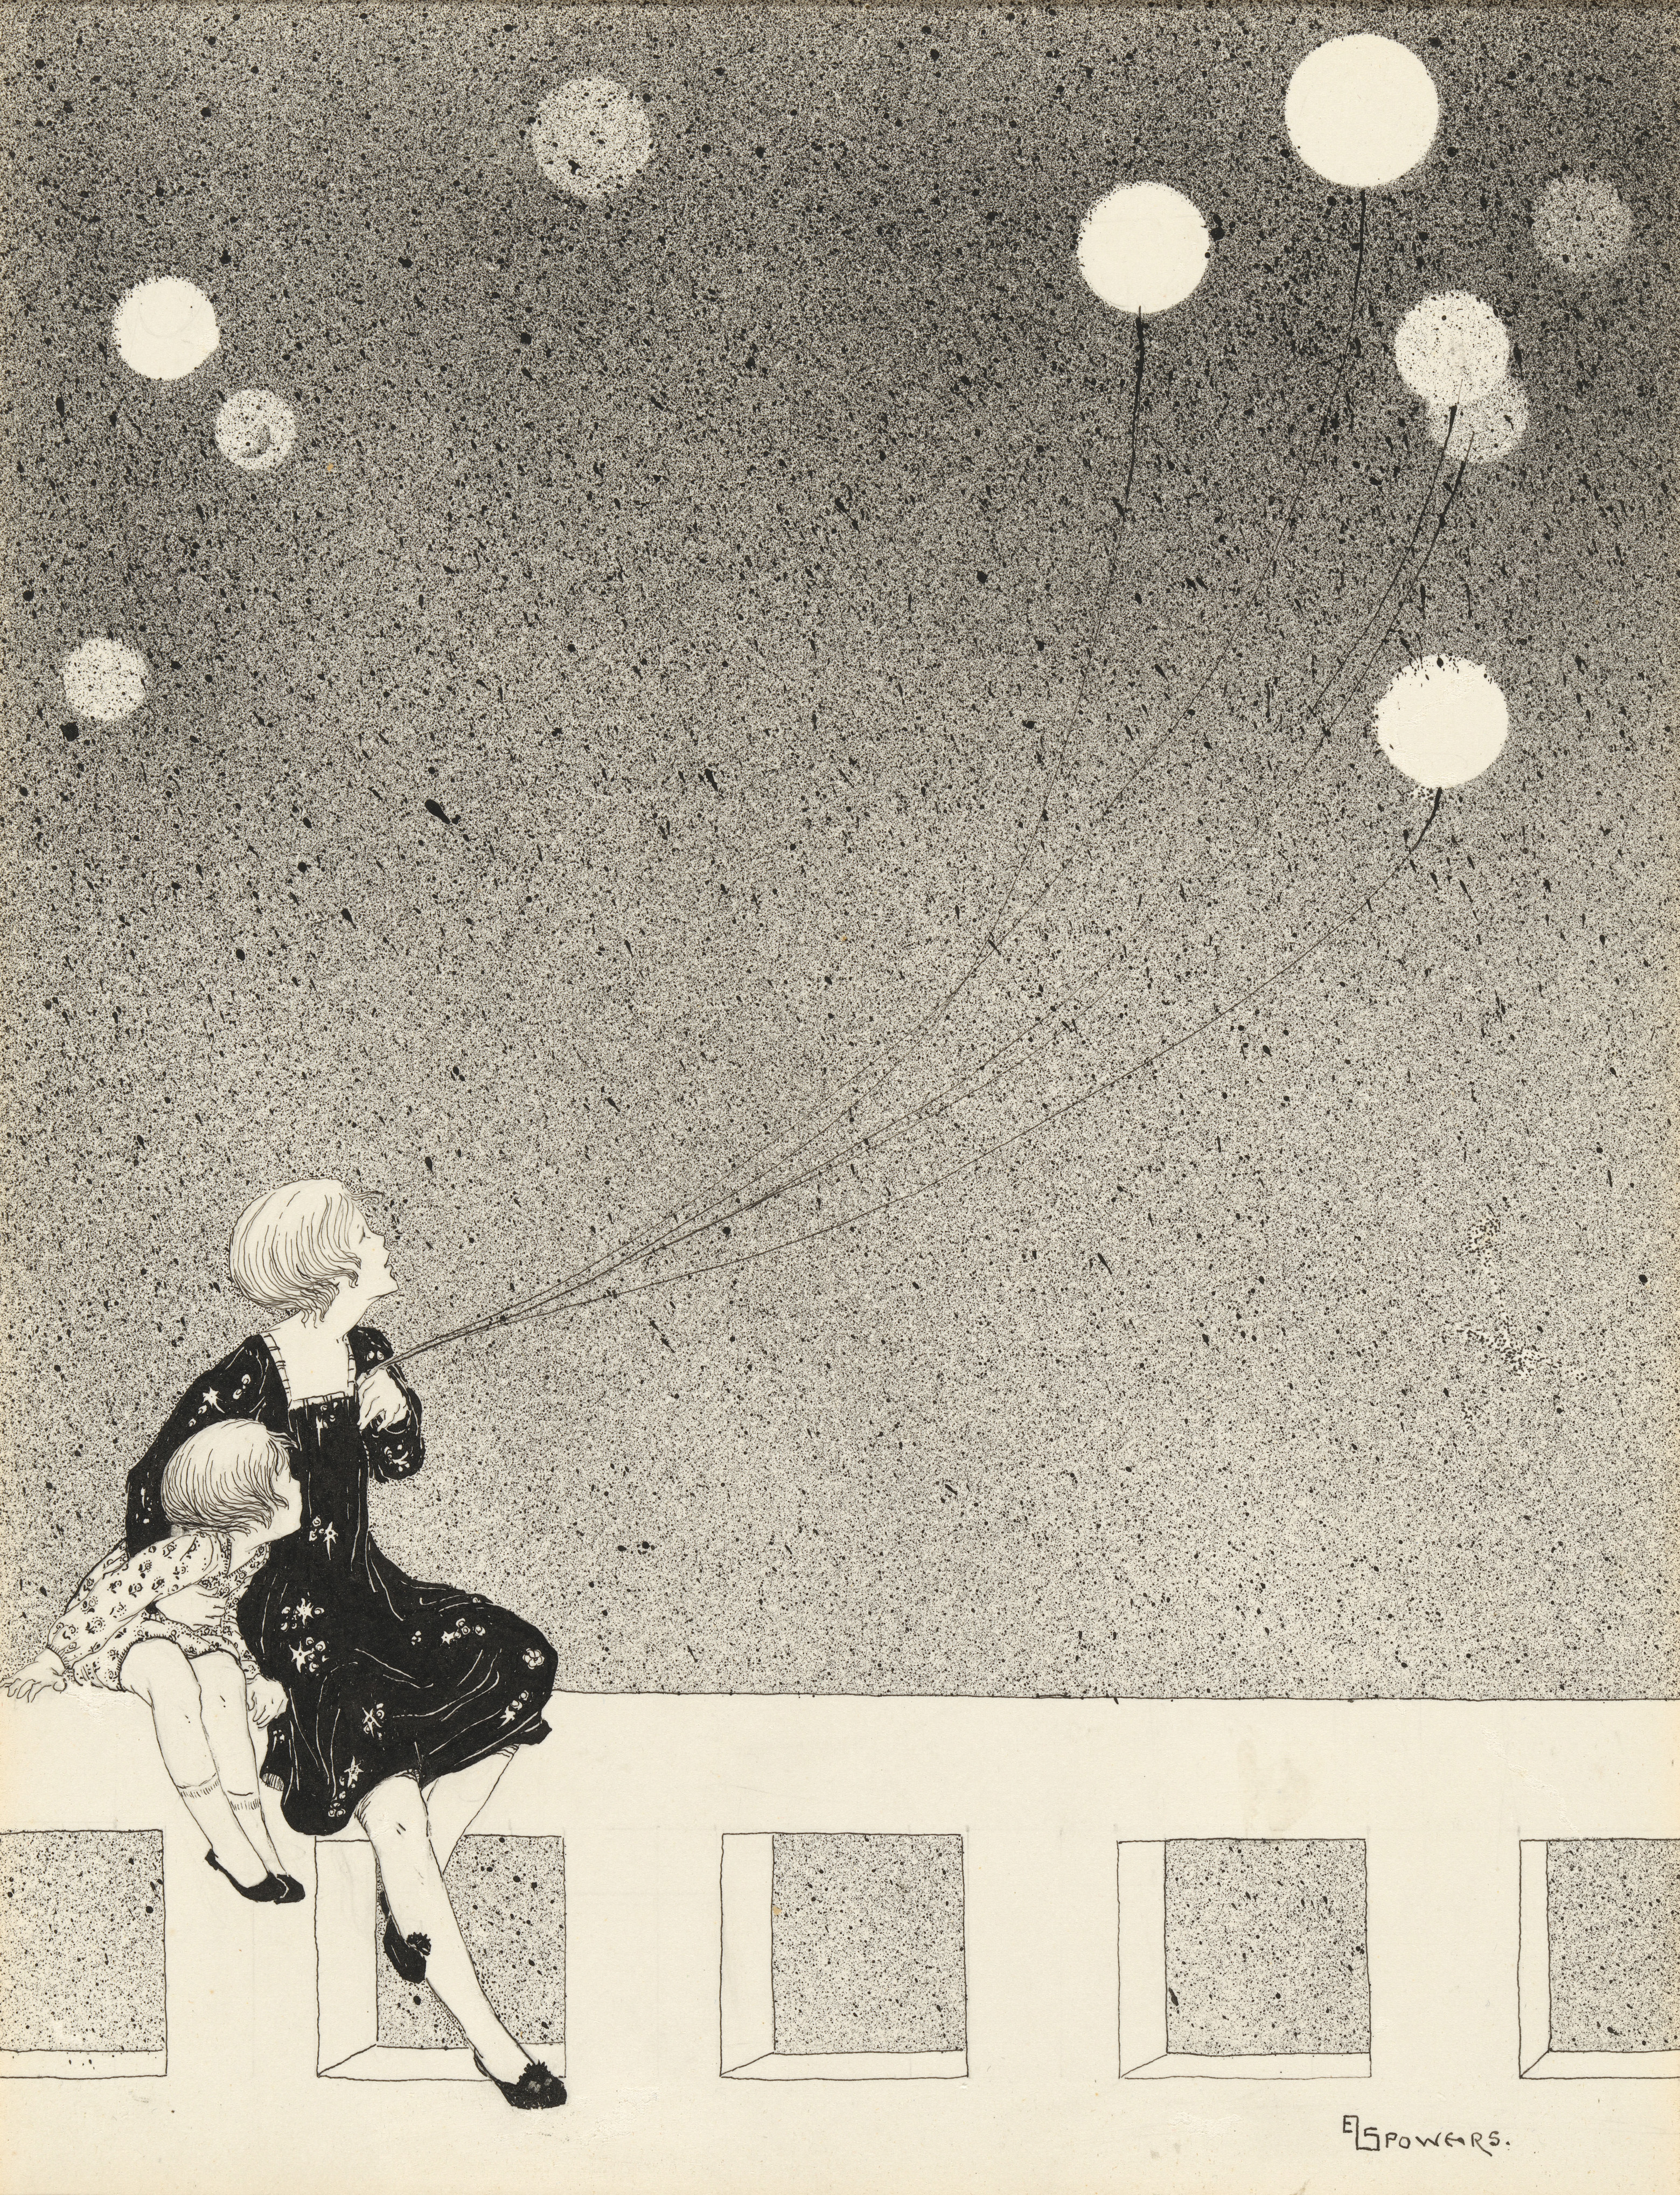 Ethel Spowers, Balloons, c. 1920, drawing in black ink, National Gallery of Australia, Kamberri/Canberra, Gift of Chris Montgomery 1993